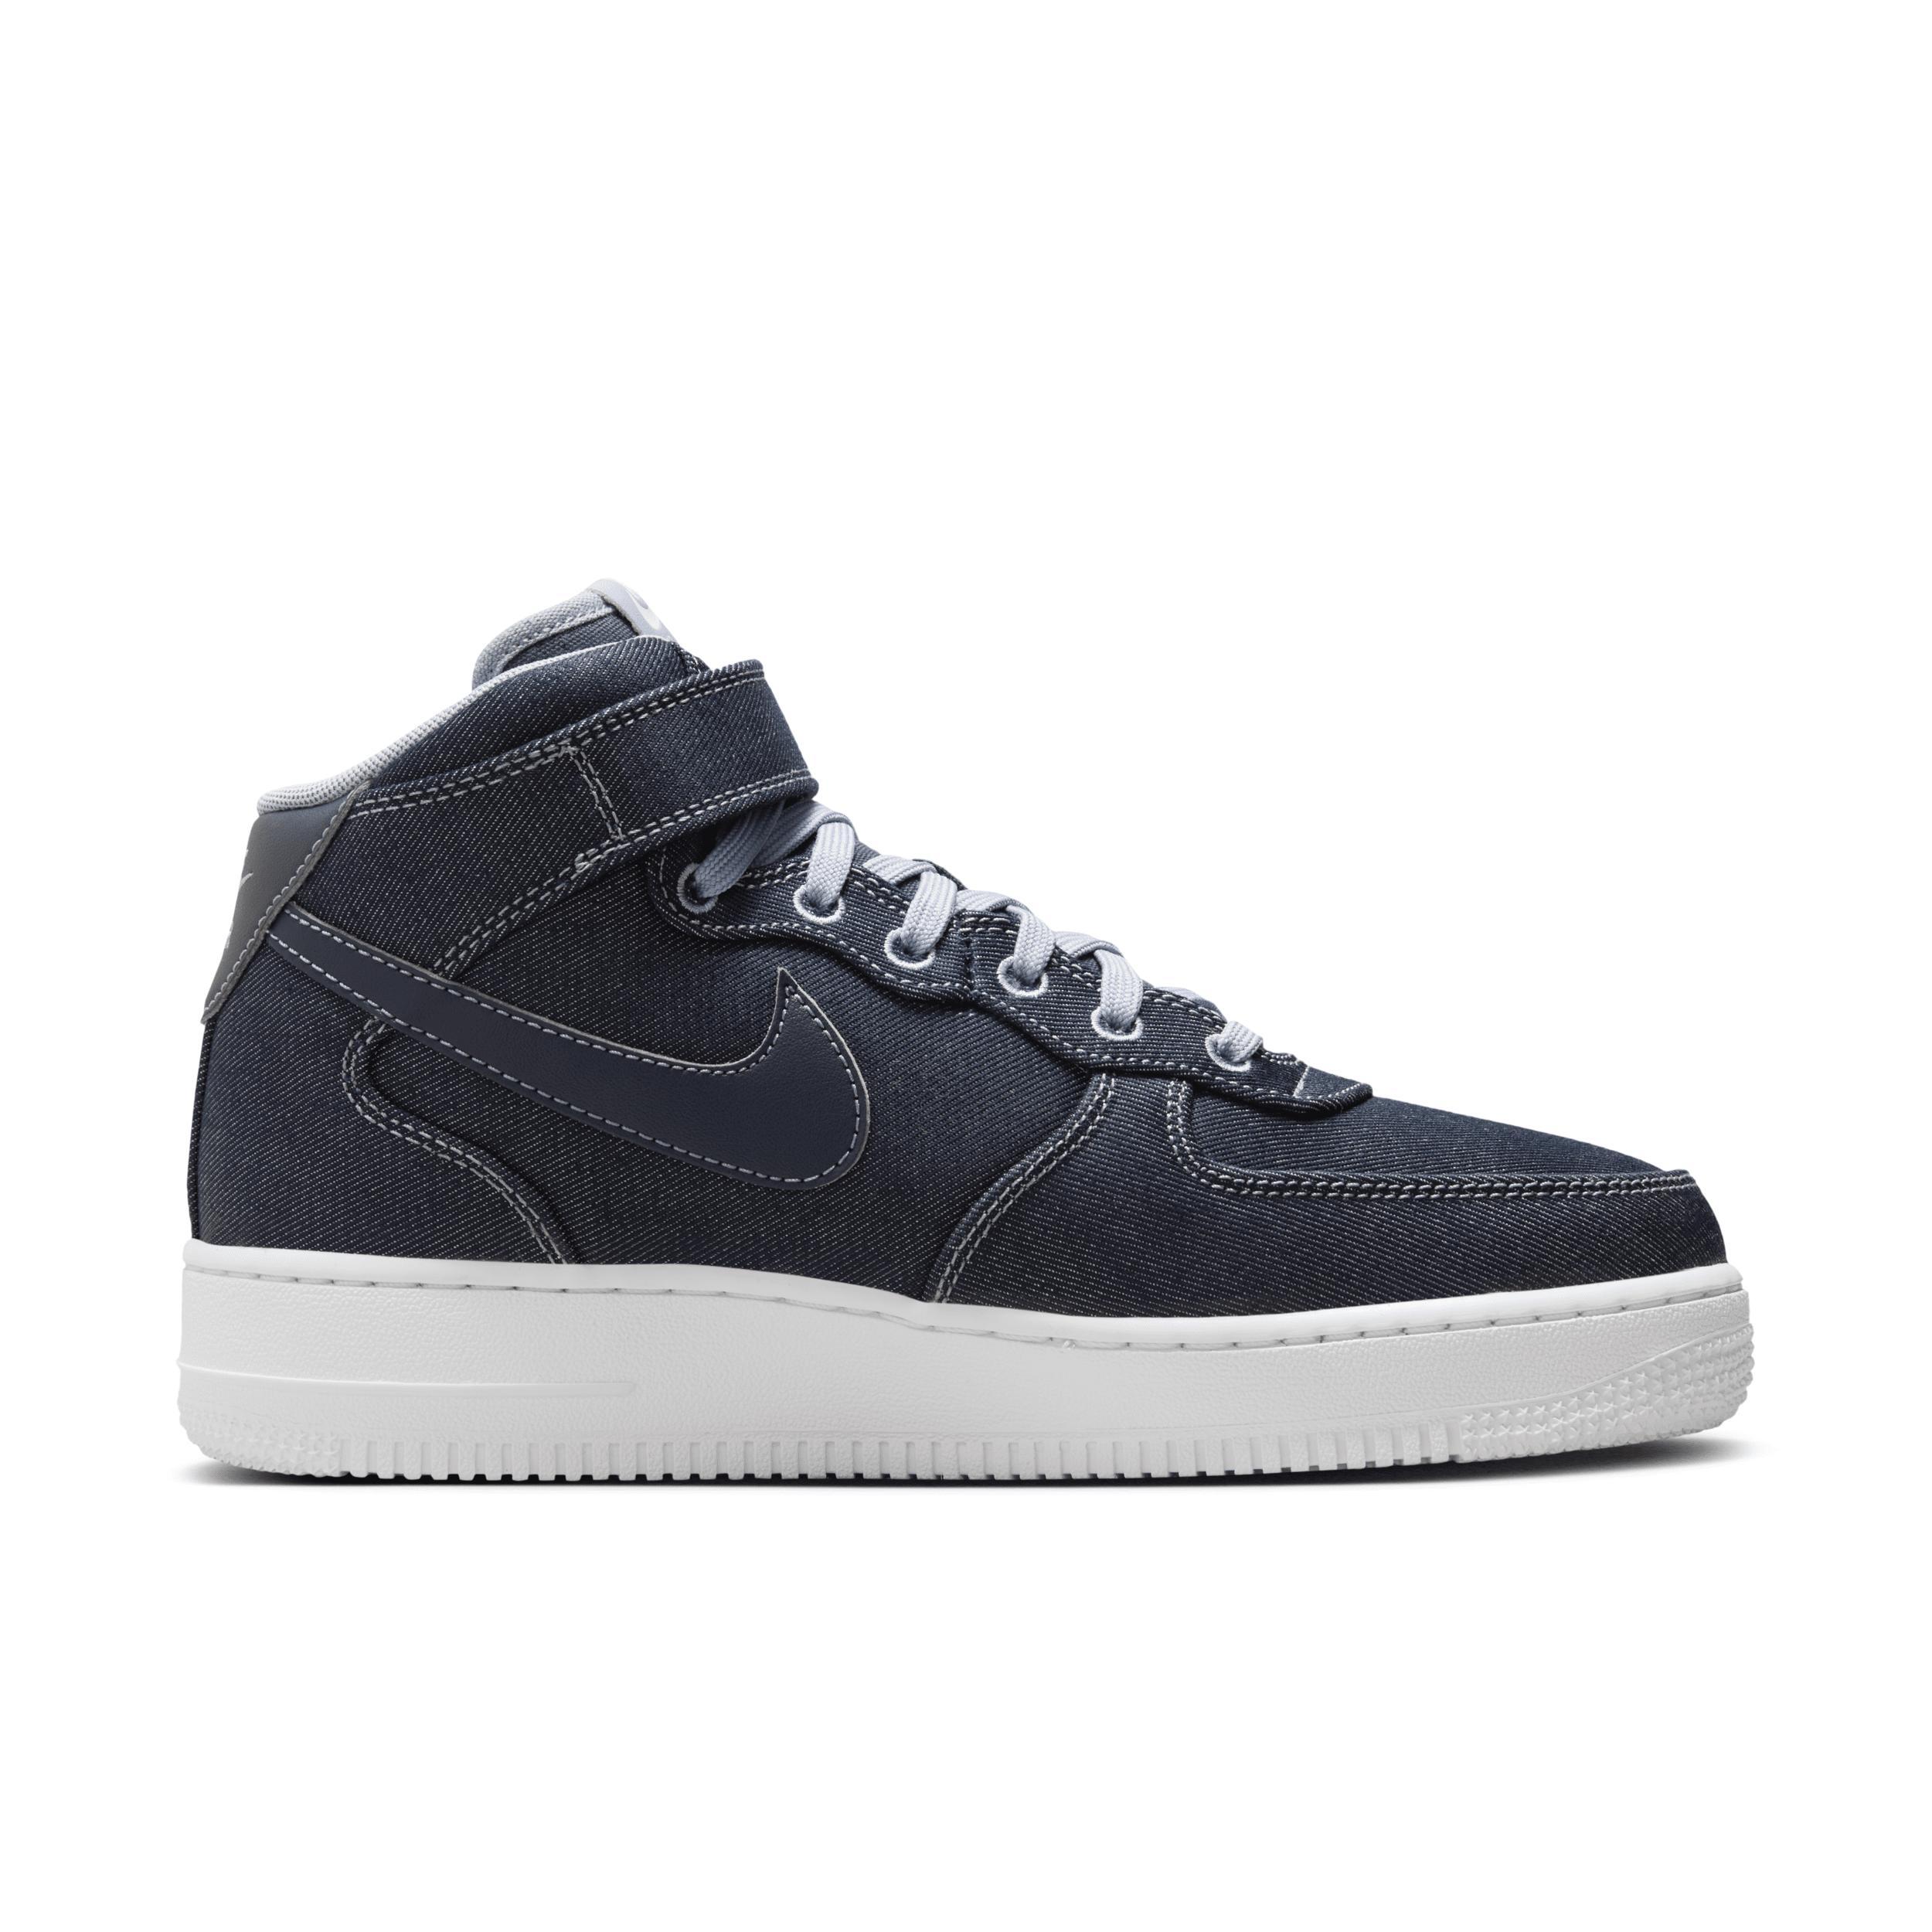 Nike Women's Air Force 1 '07 Mid Shoes Product Image